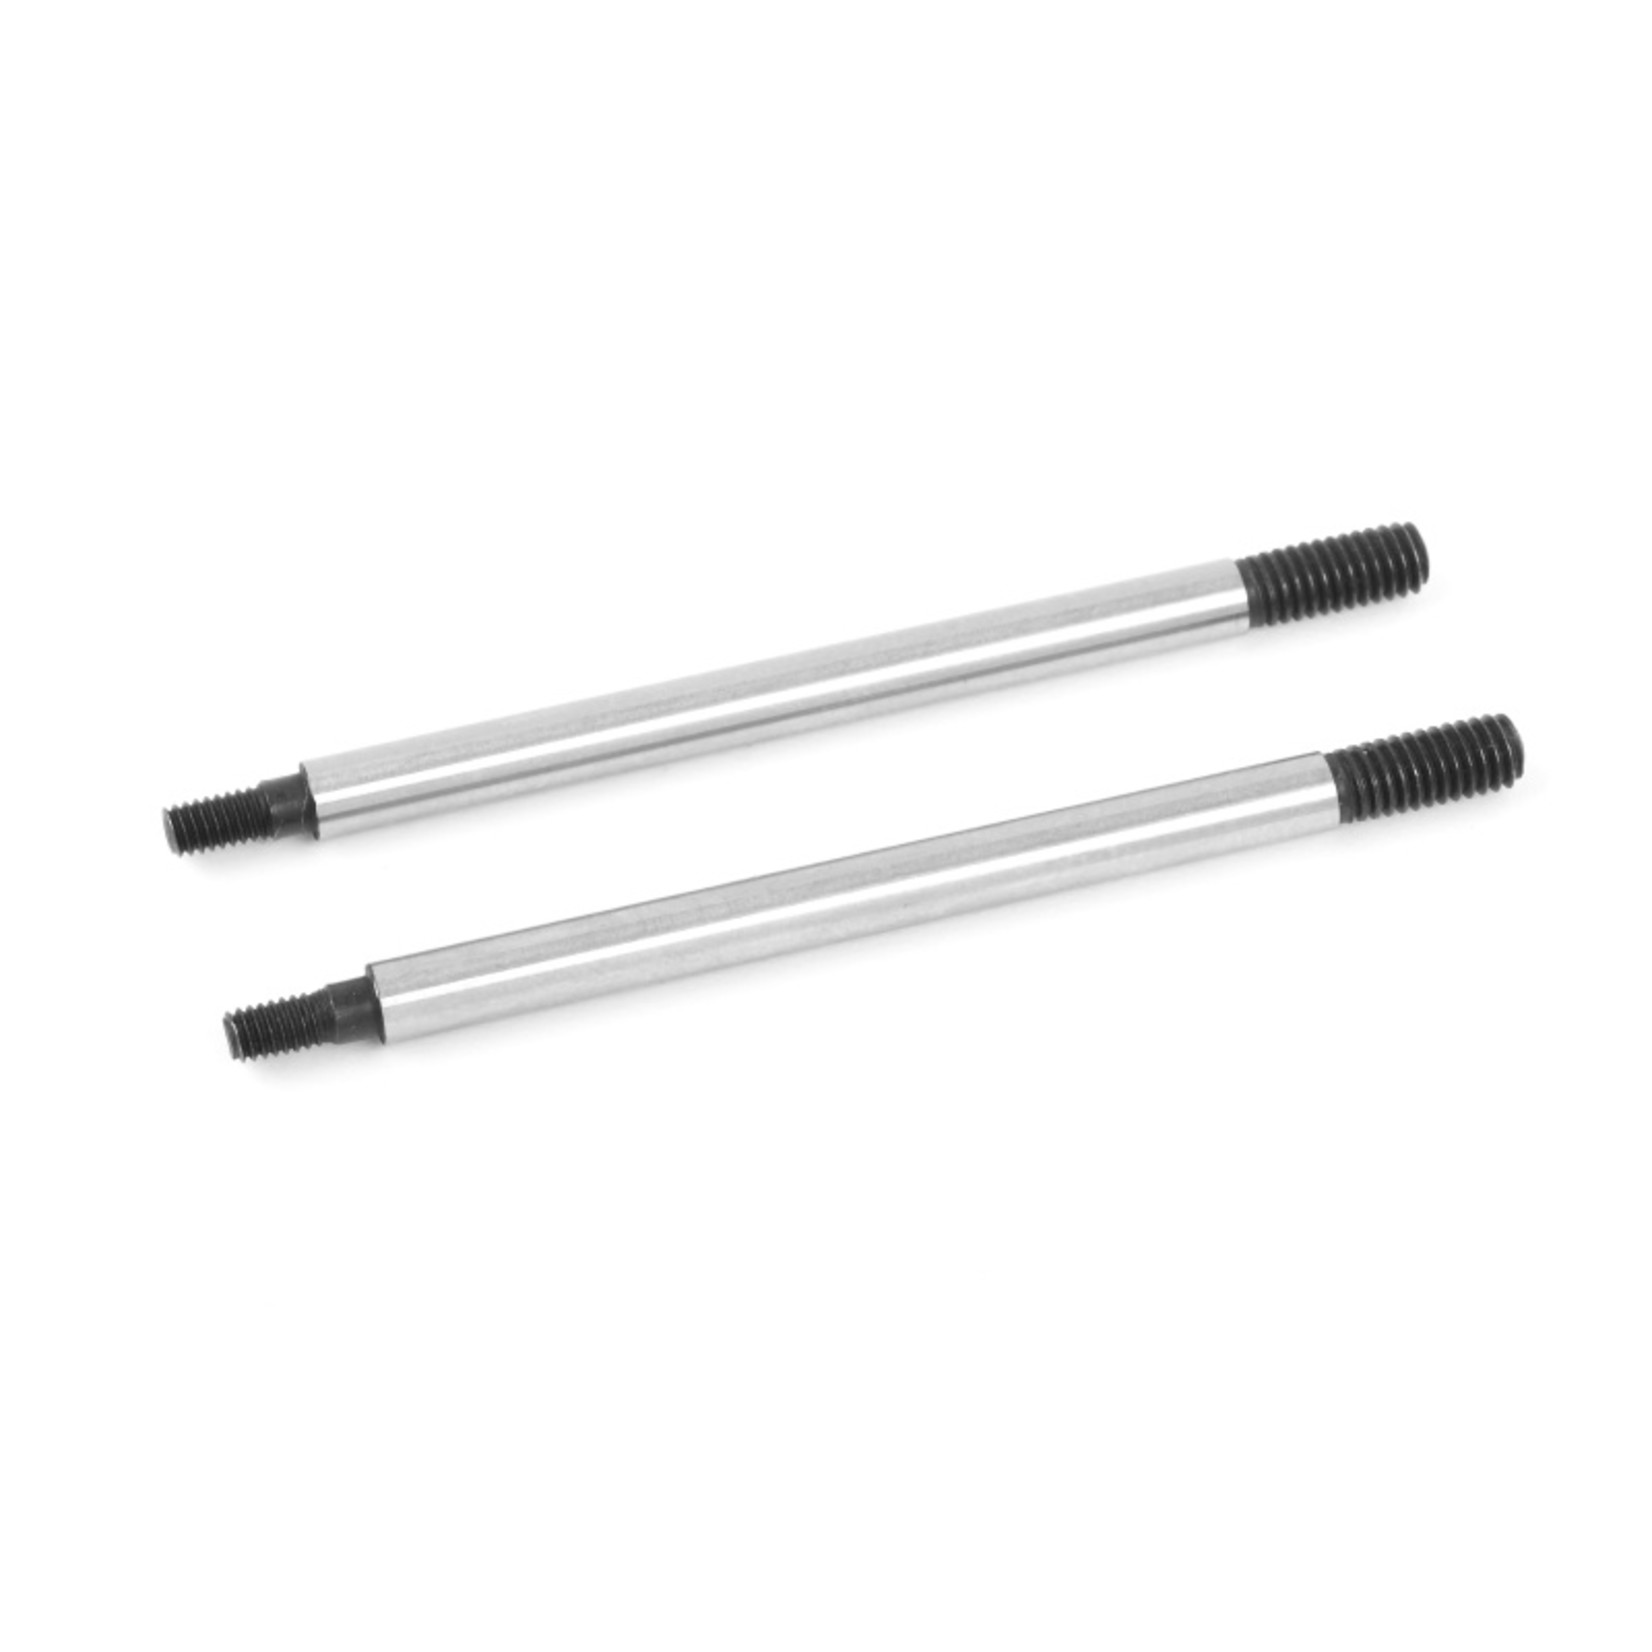 Corally (Team Corally) Shock Shaft - 55mm - Front - Steel - 2 pcs: Python